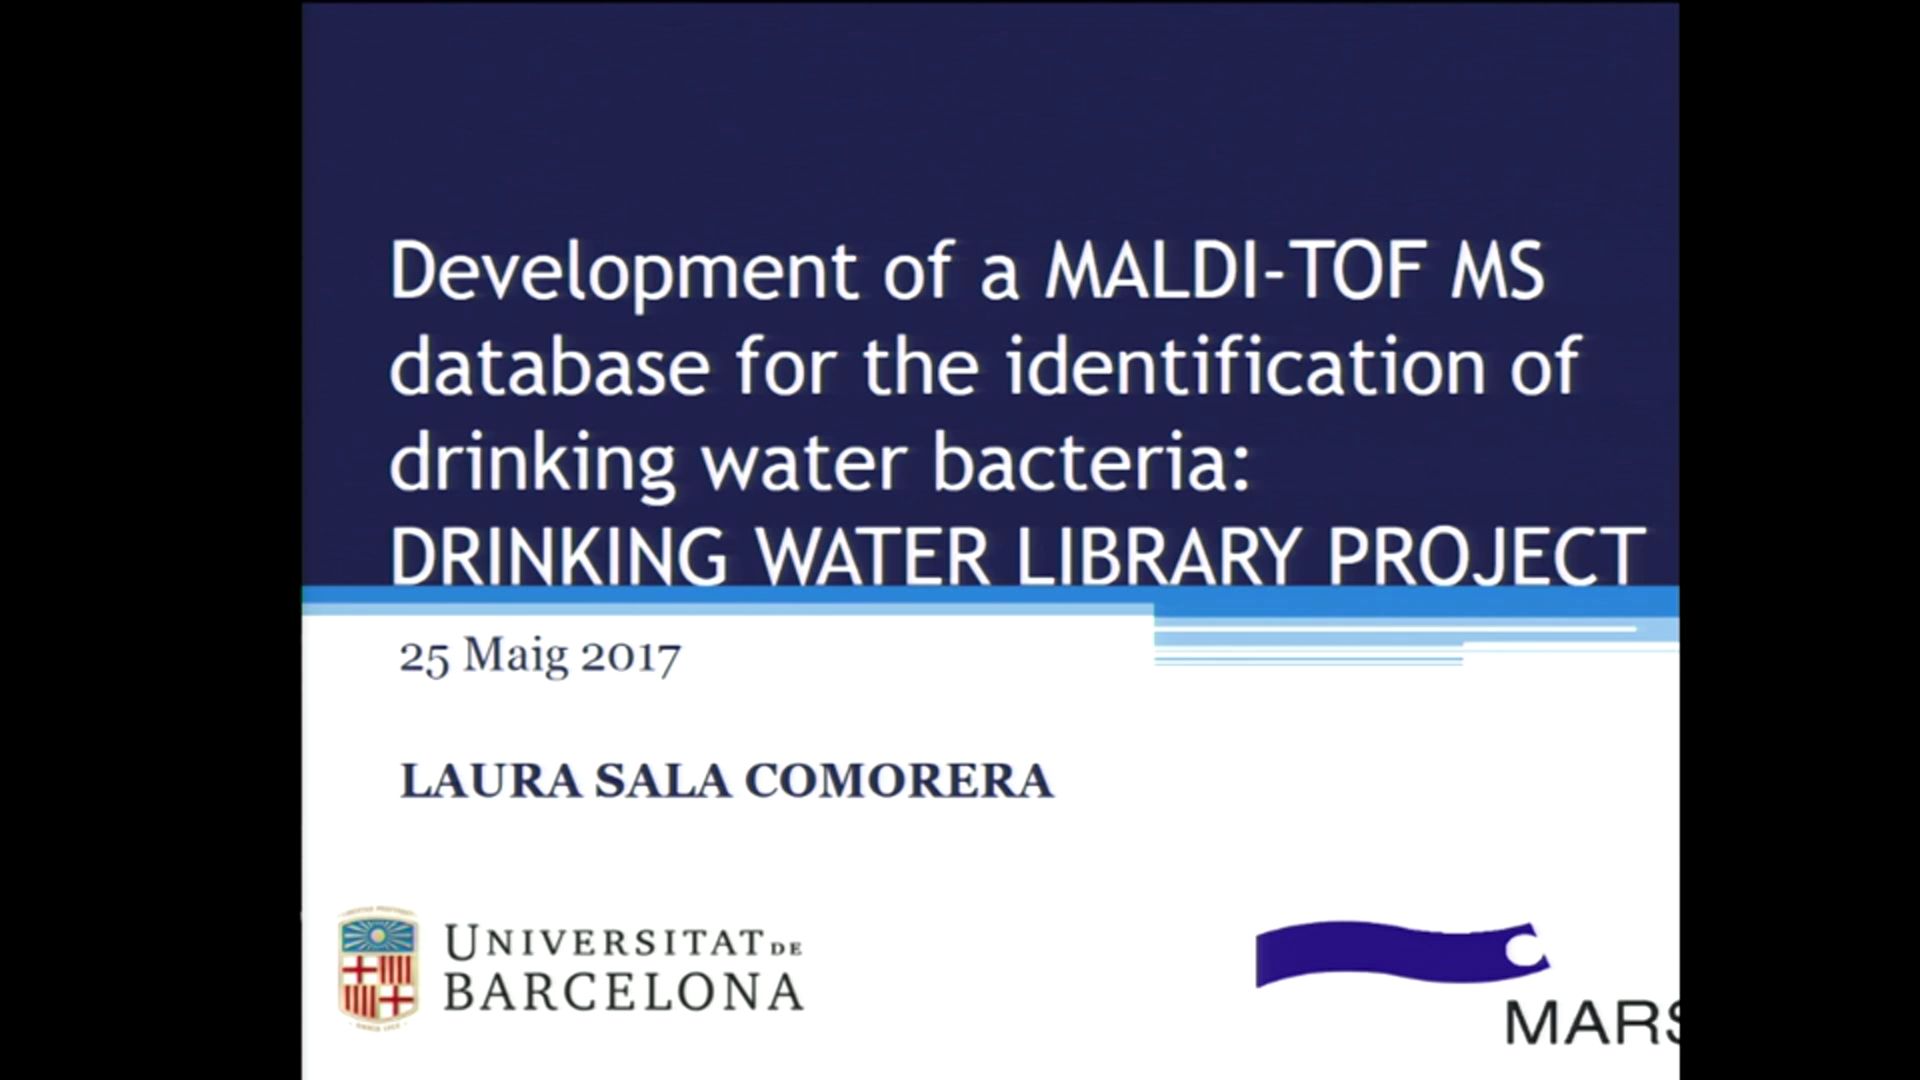 Development of a MALDI-TOF database for the identification of drinking water bacteria